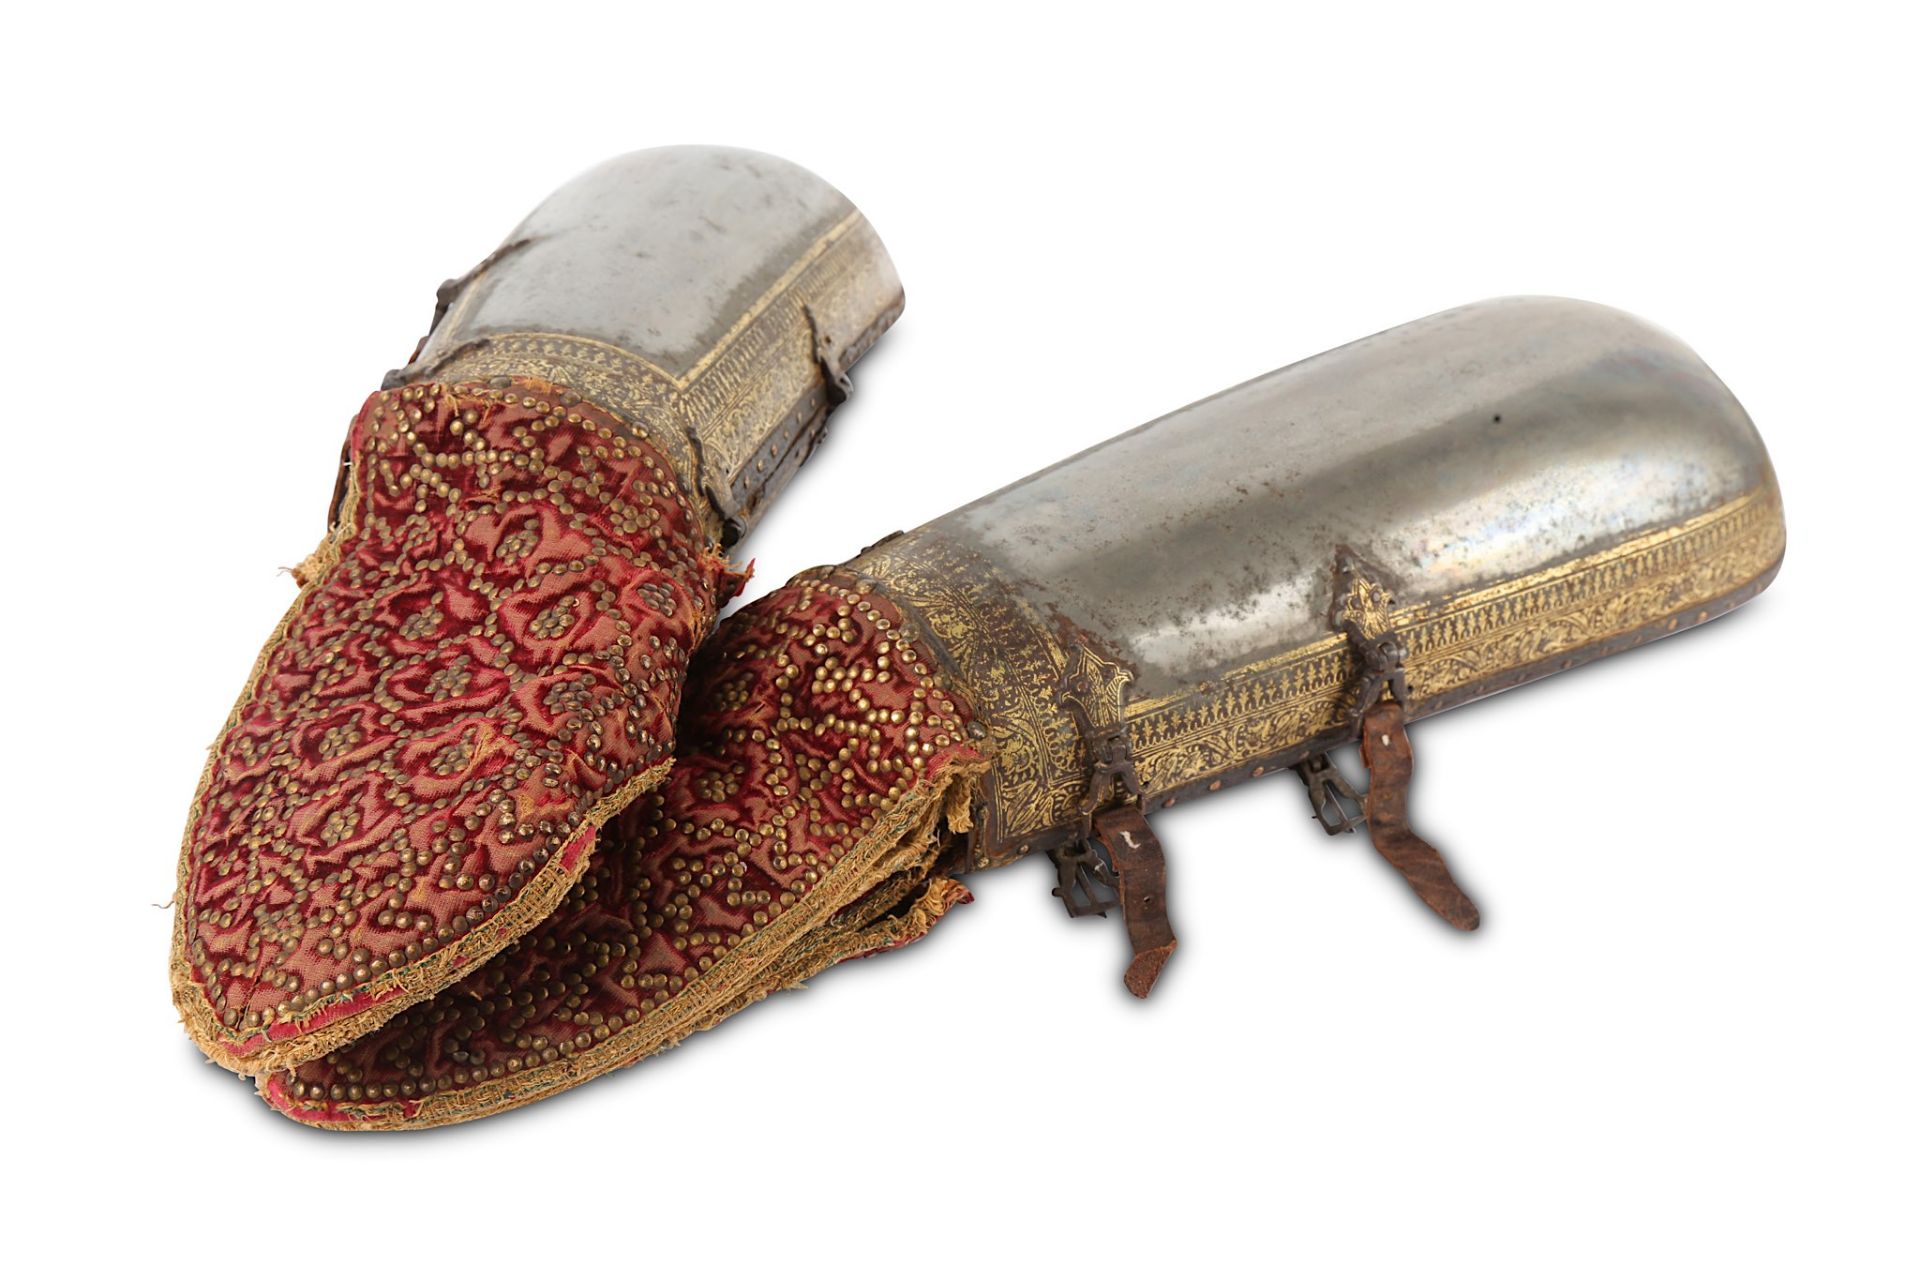 A PAIR OF NORTH INDIAN ARM GUARDS (DASTANA / BAZUBAND) North India, 18th century  A pair of